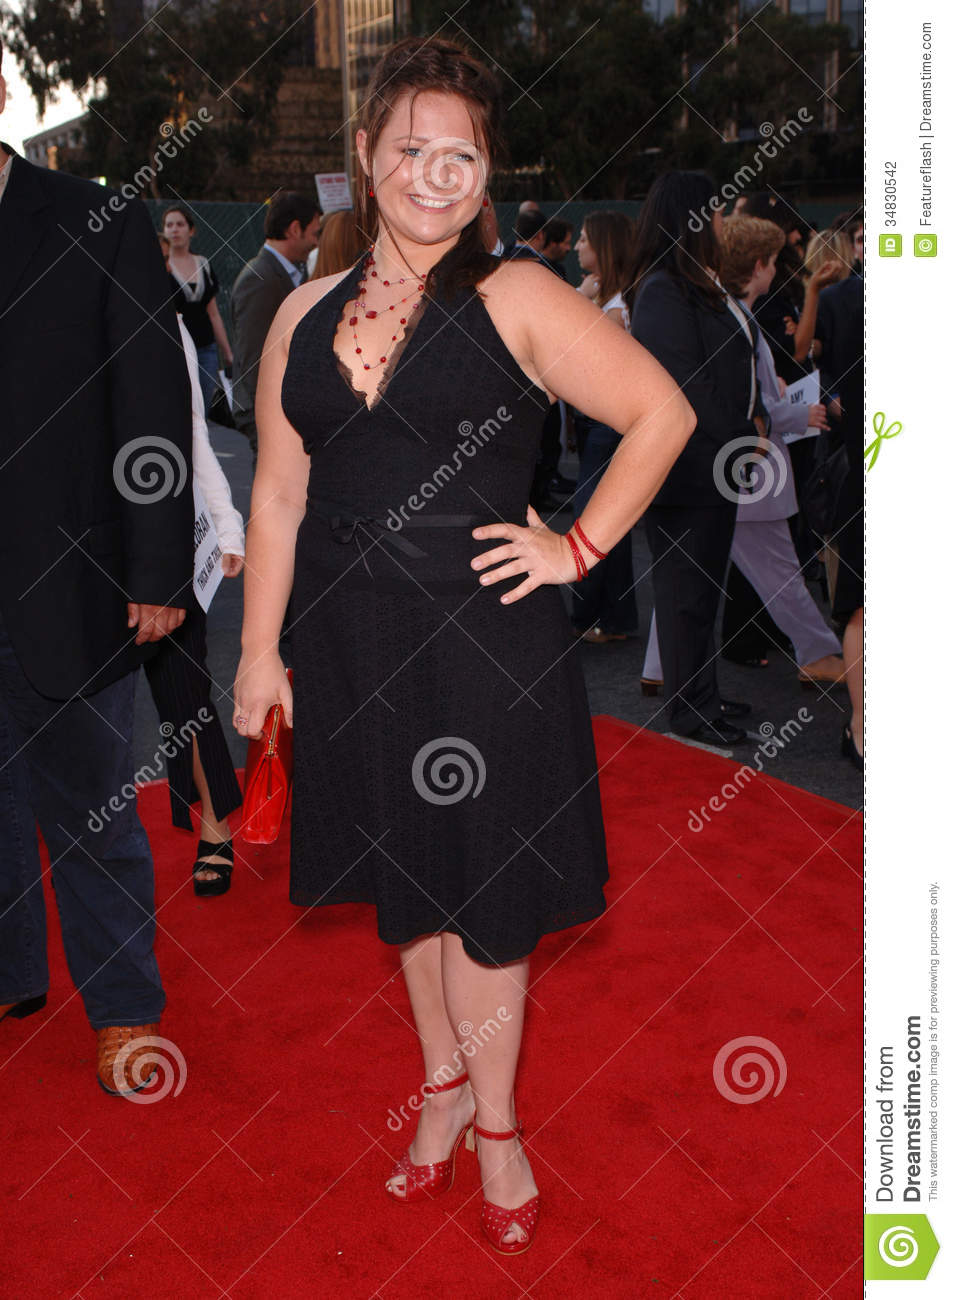 images-of-amy-halloran